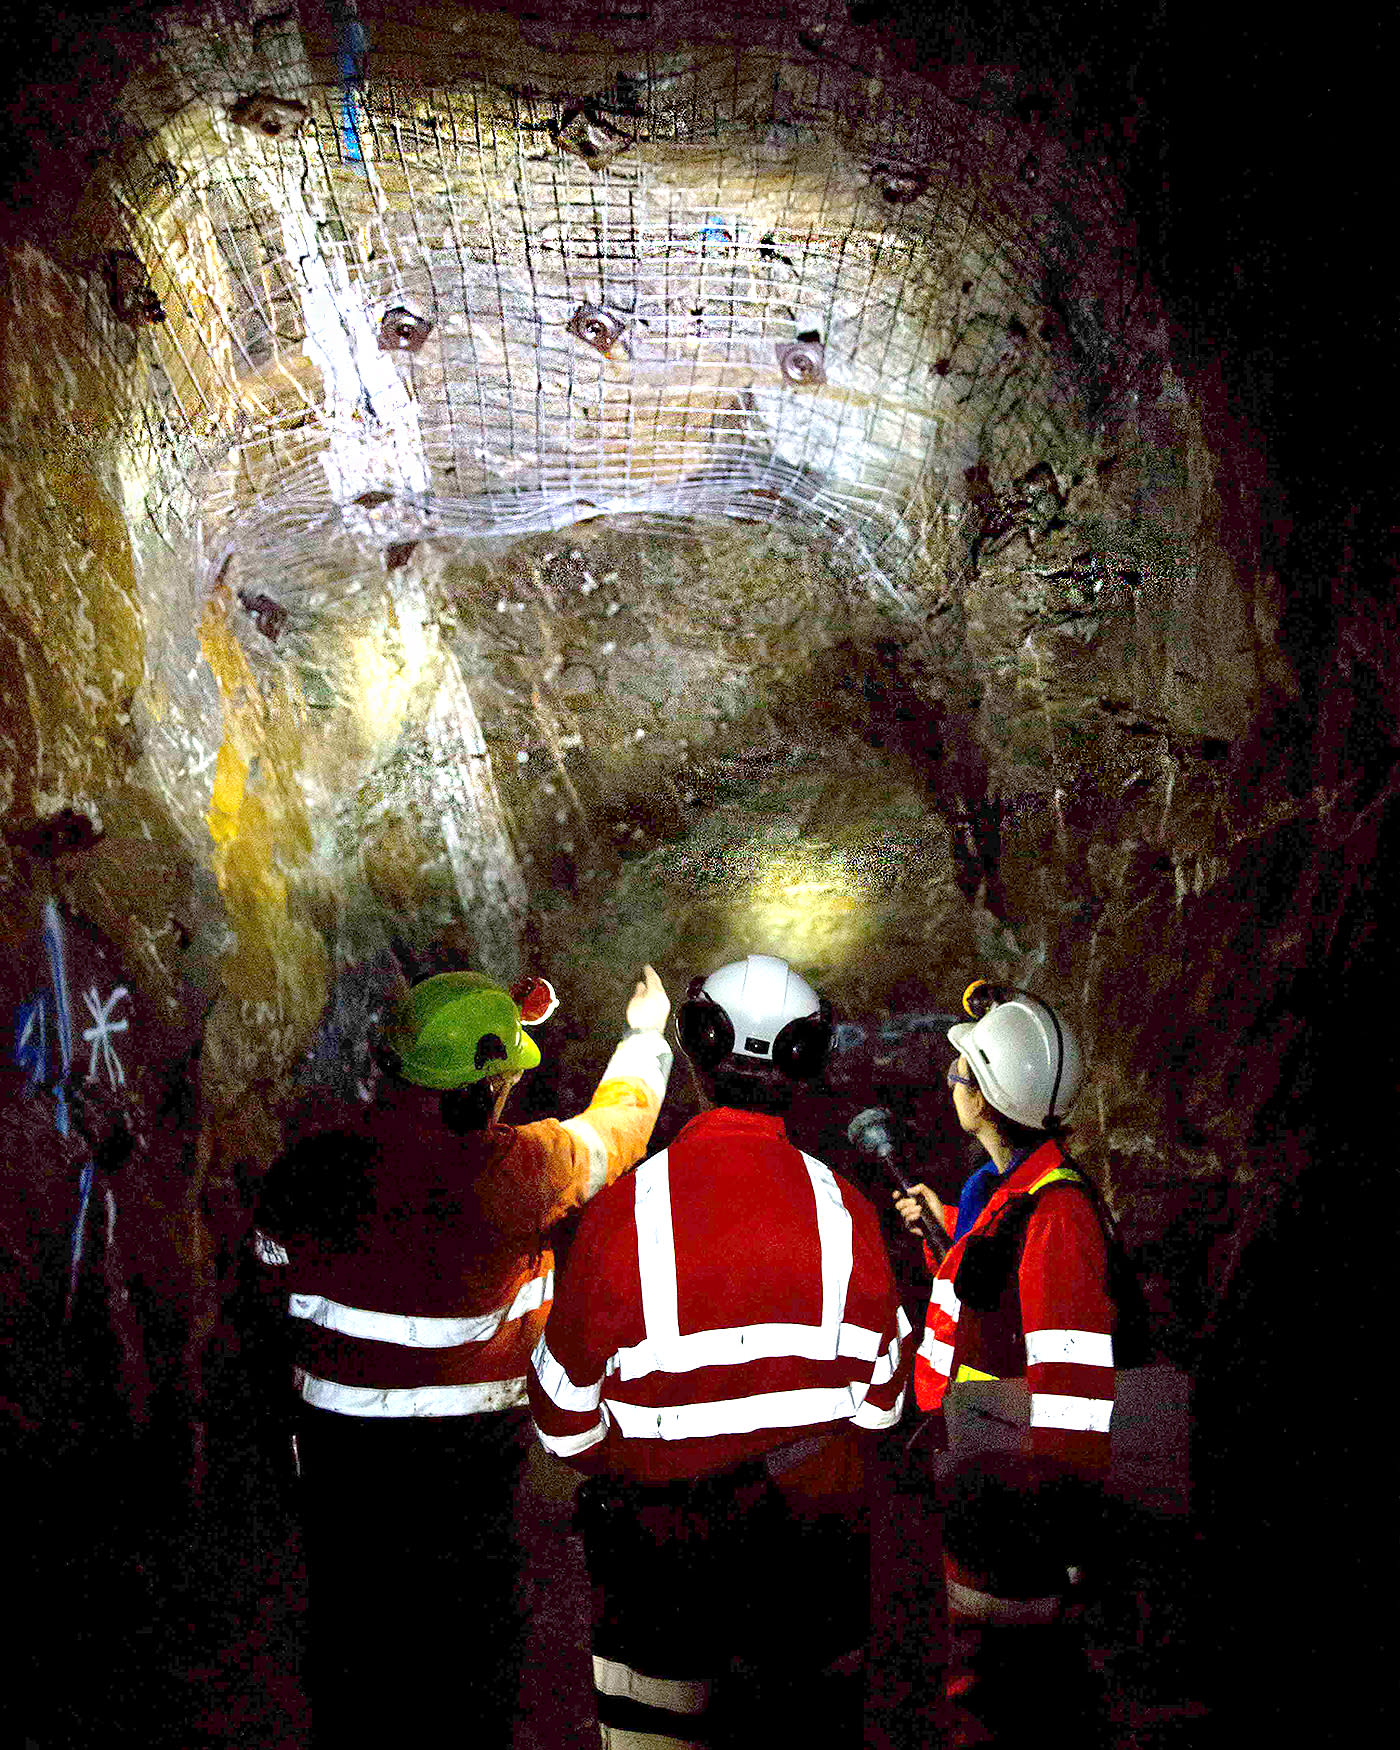 People in high vis jackets and hard hats in a mine